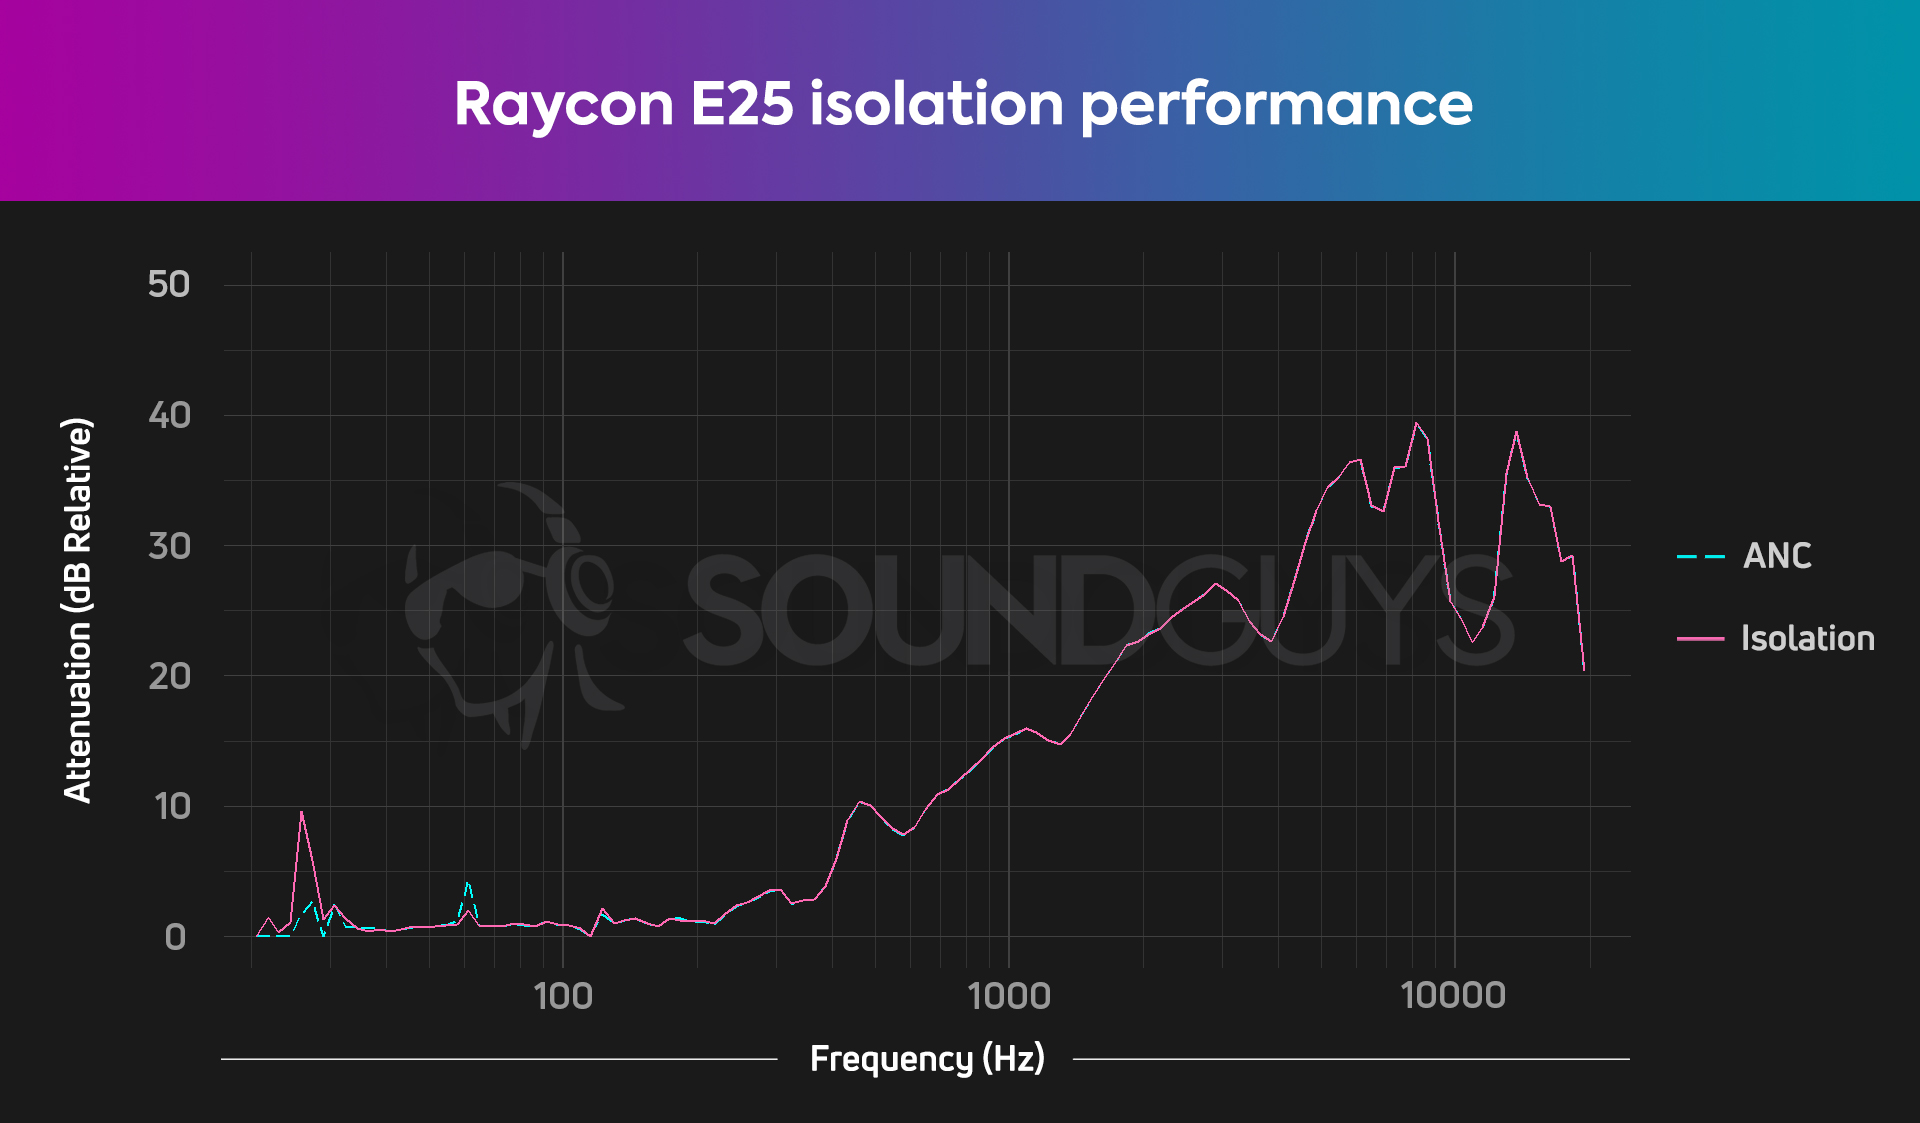 A chart showing the isolation performance of the Raycon E25.